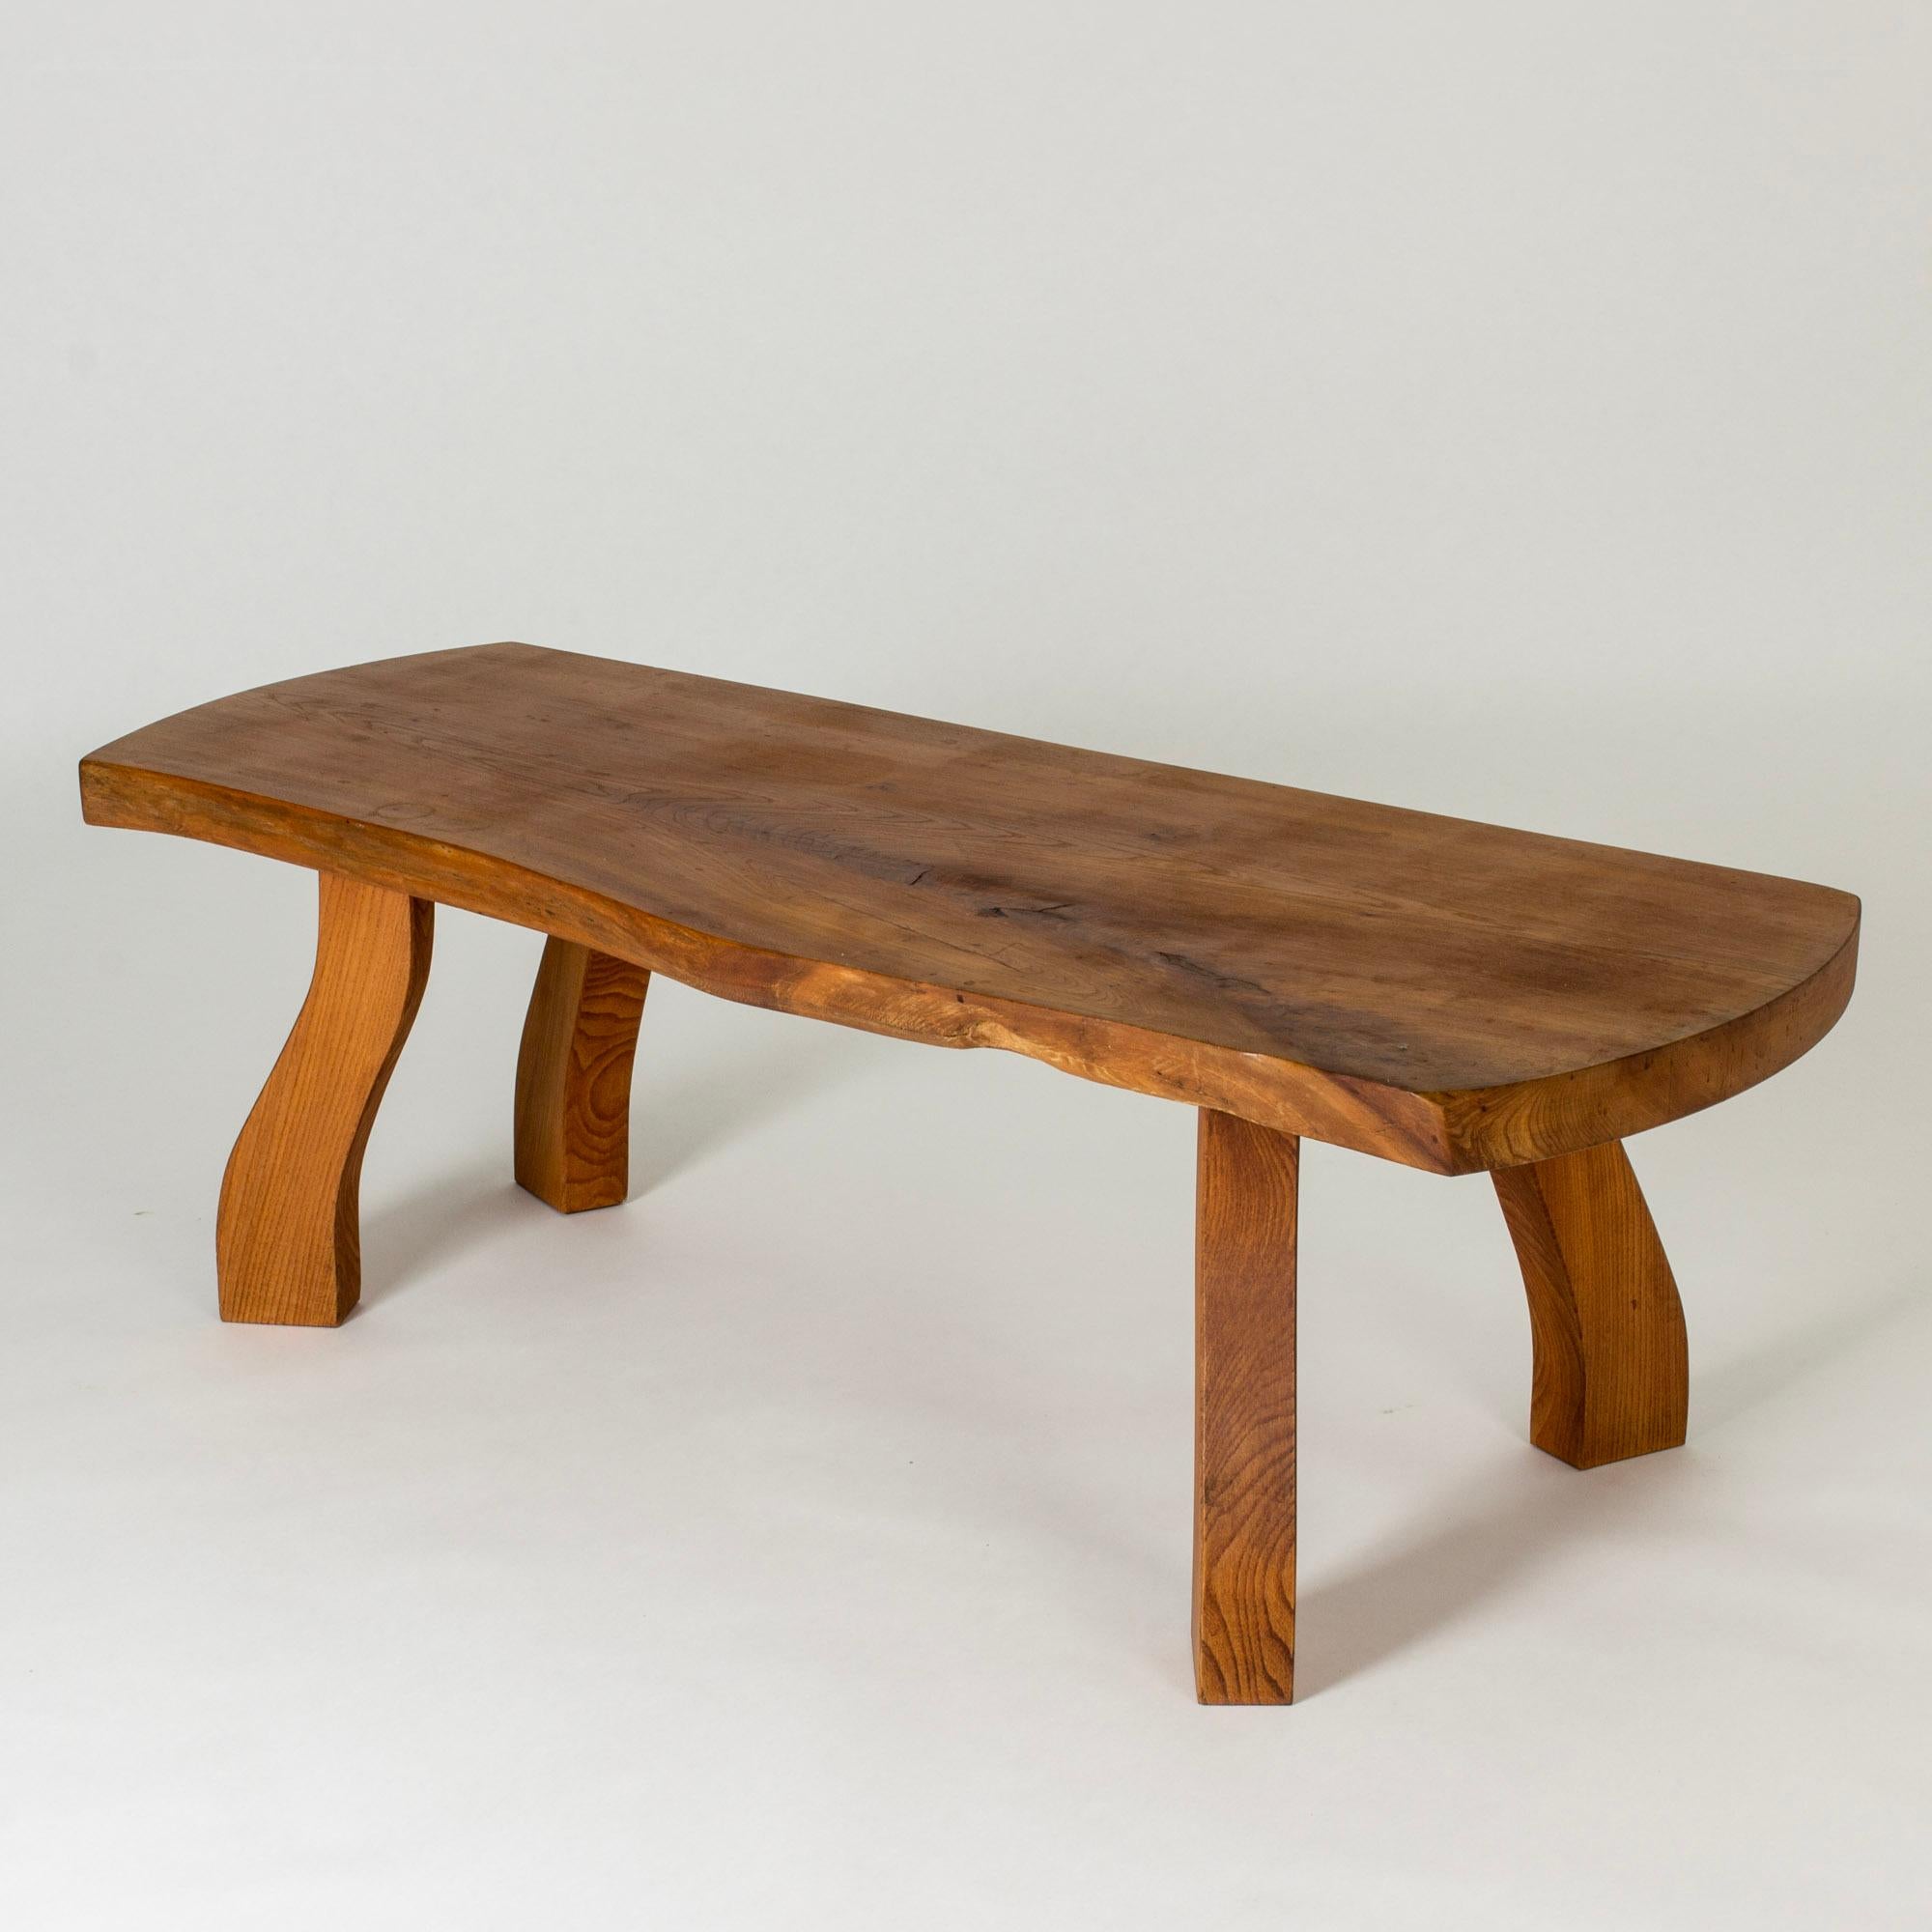 Striking elmwood coffee table by Peter Beijbom, made from an elmwood slab with lovely woodgrain. Beautiful, oiled surface. Sturdy, sculpted legs that pick up the organic design of the table top.

The story of the striking elmwood tables from C. A.